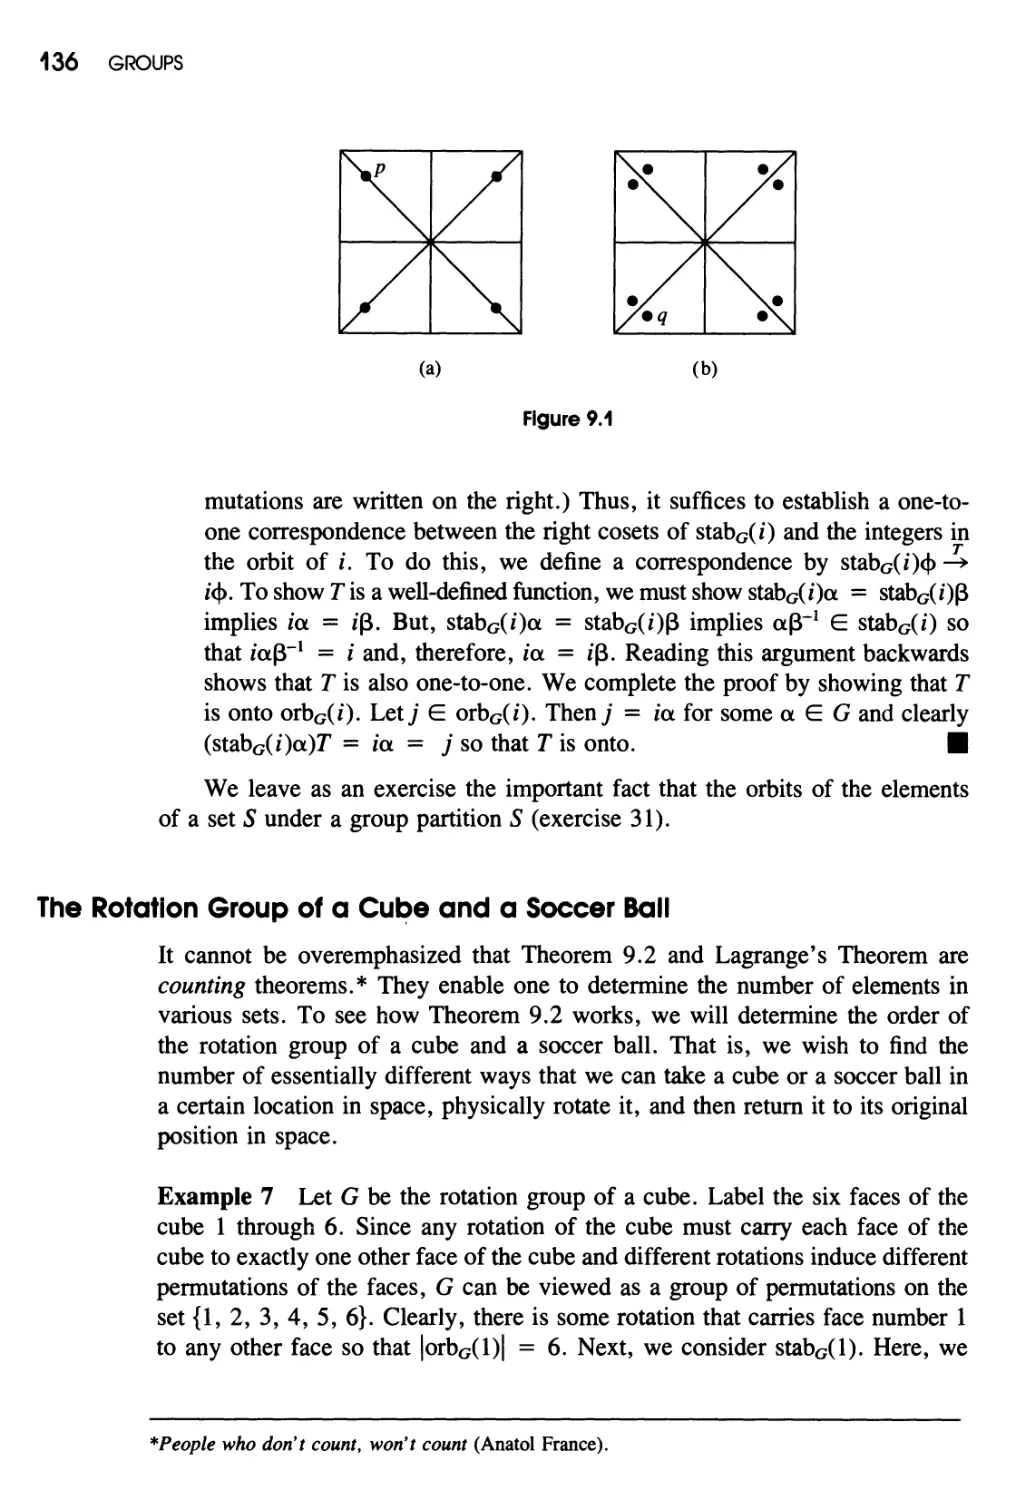 The Rotation Group of a Cube and a Soccer Ball